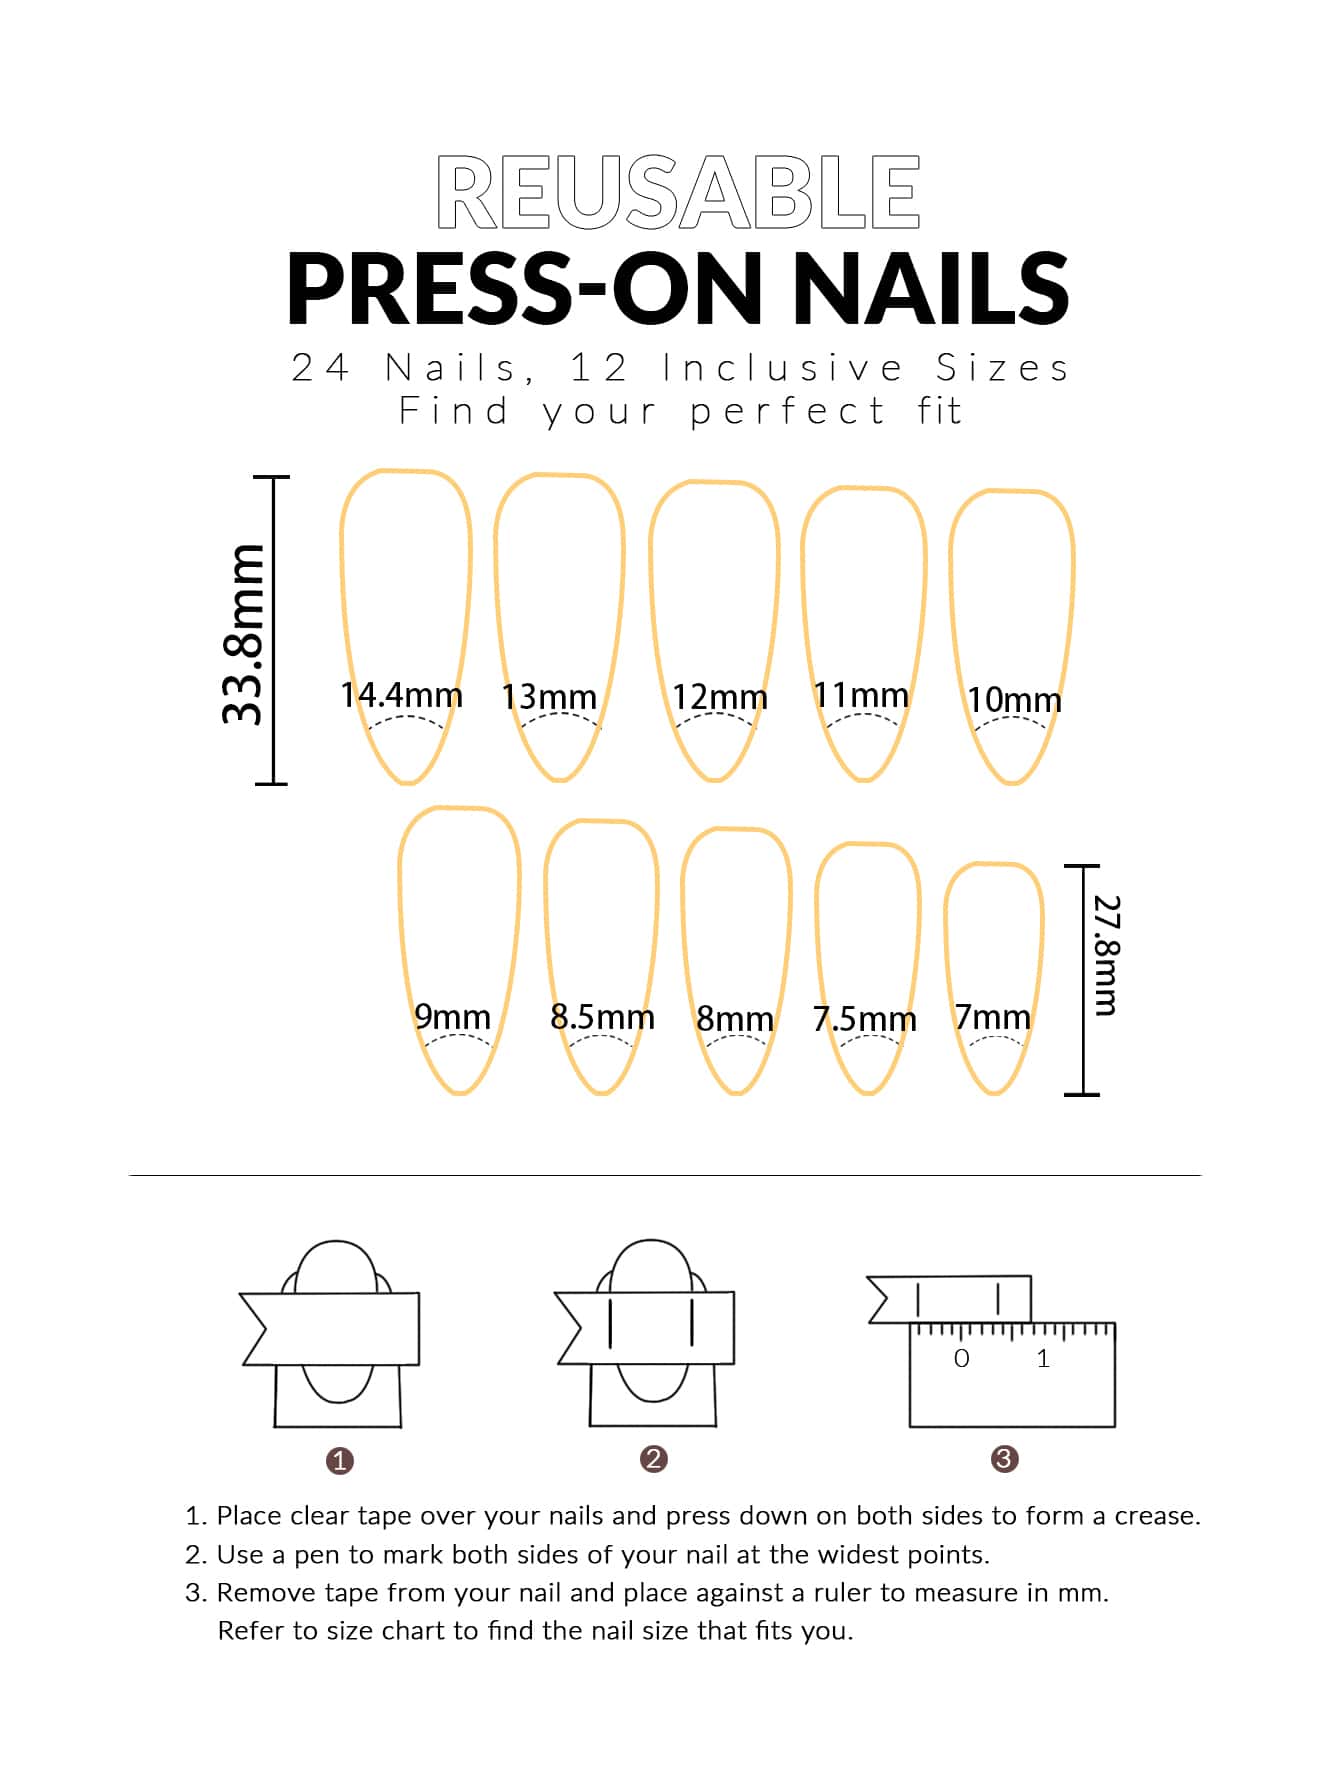 Long Stiletto Nails Nude Nails Striped Press On Nails